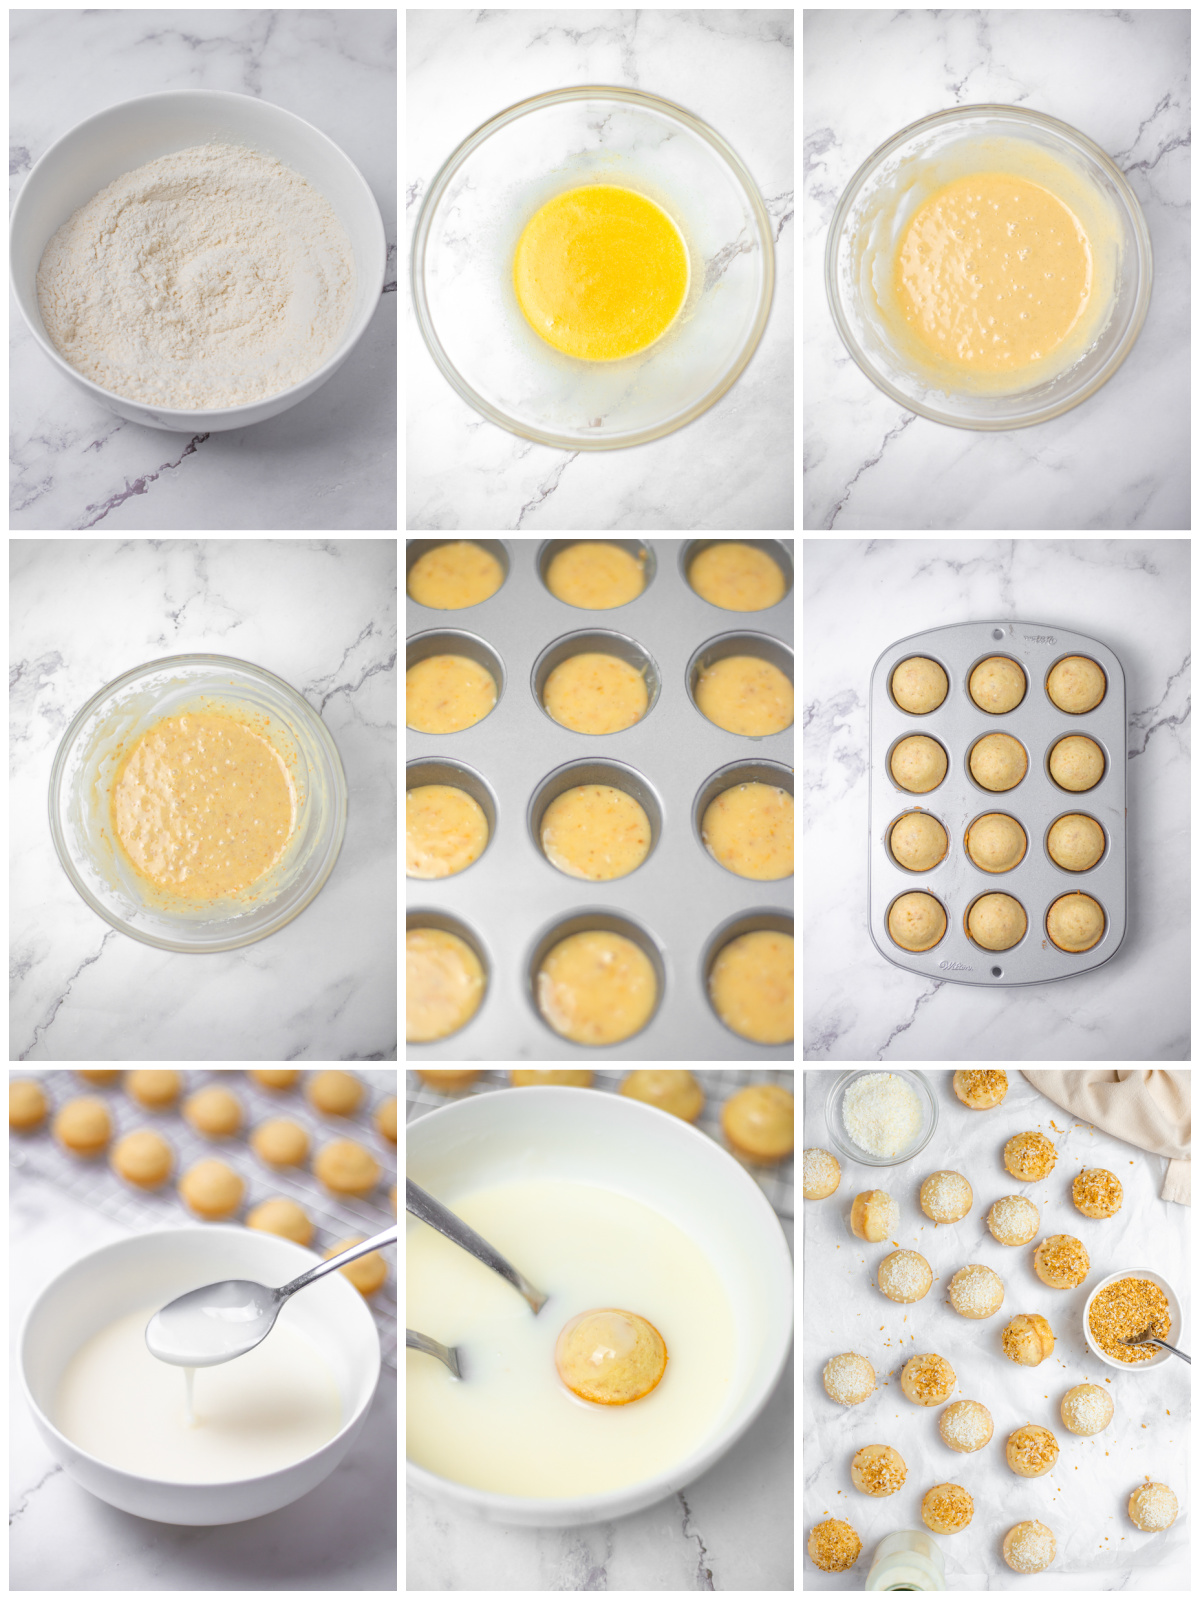 Step by step photos on how to make Baked Coconut Donut Holes